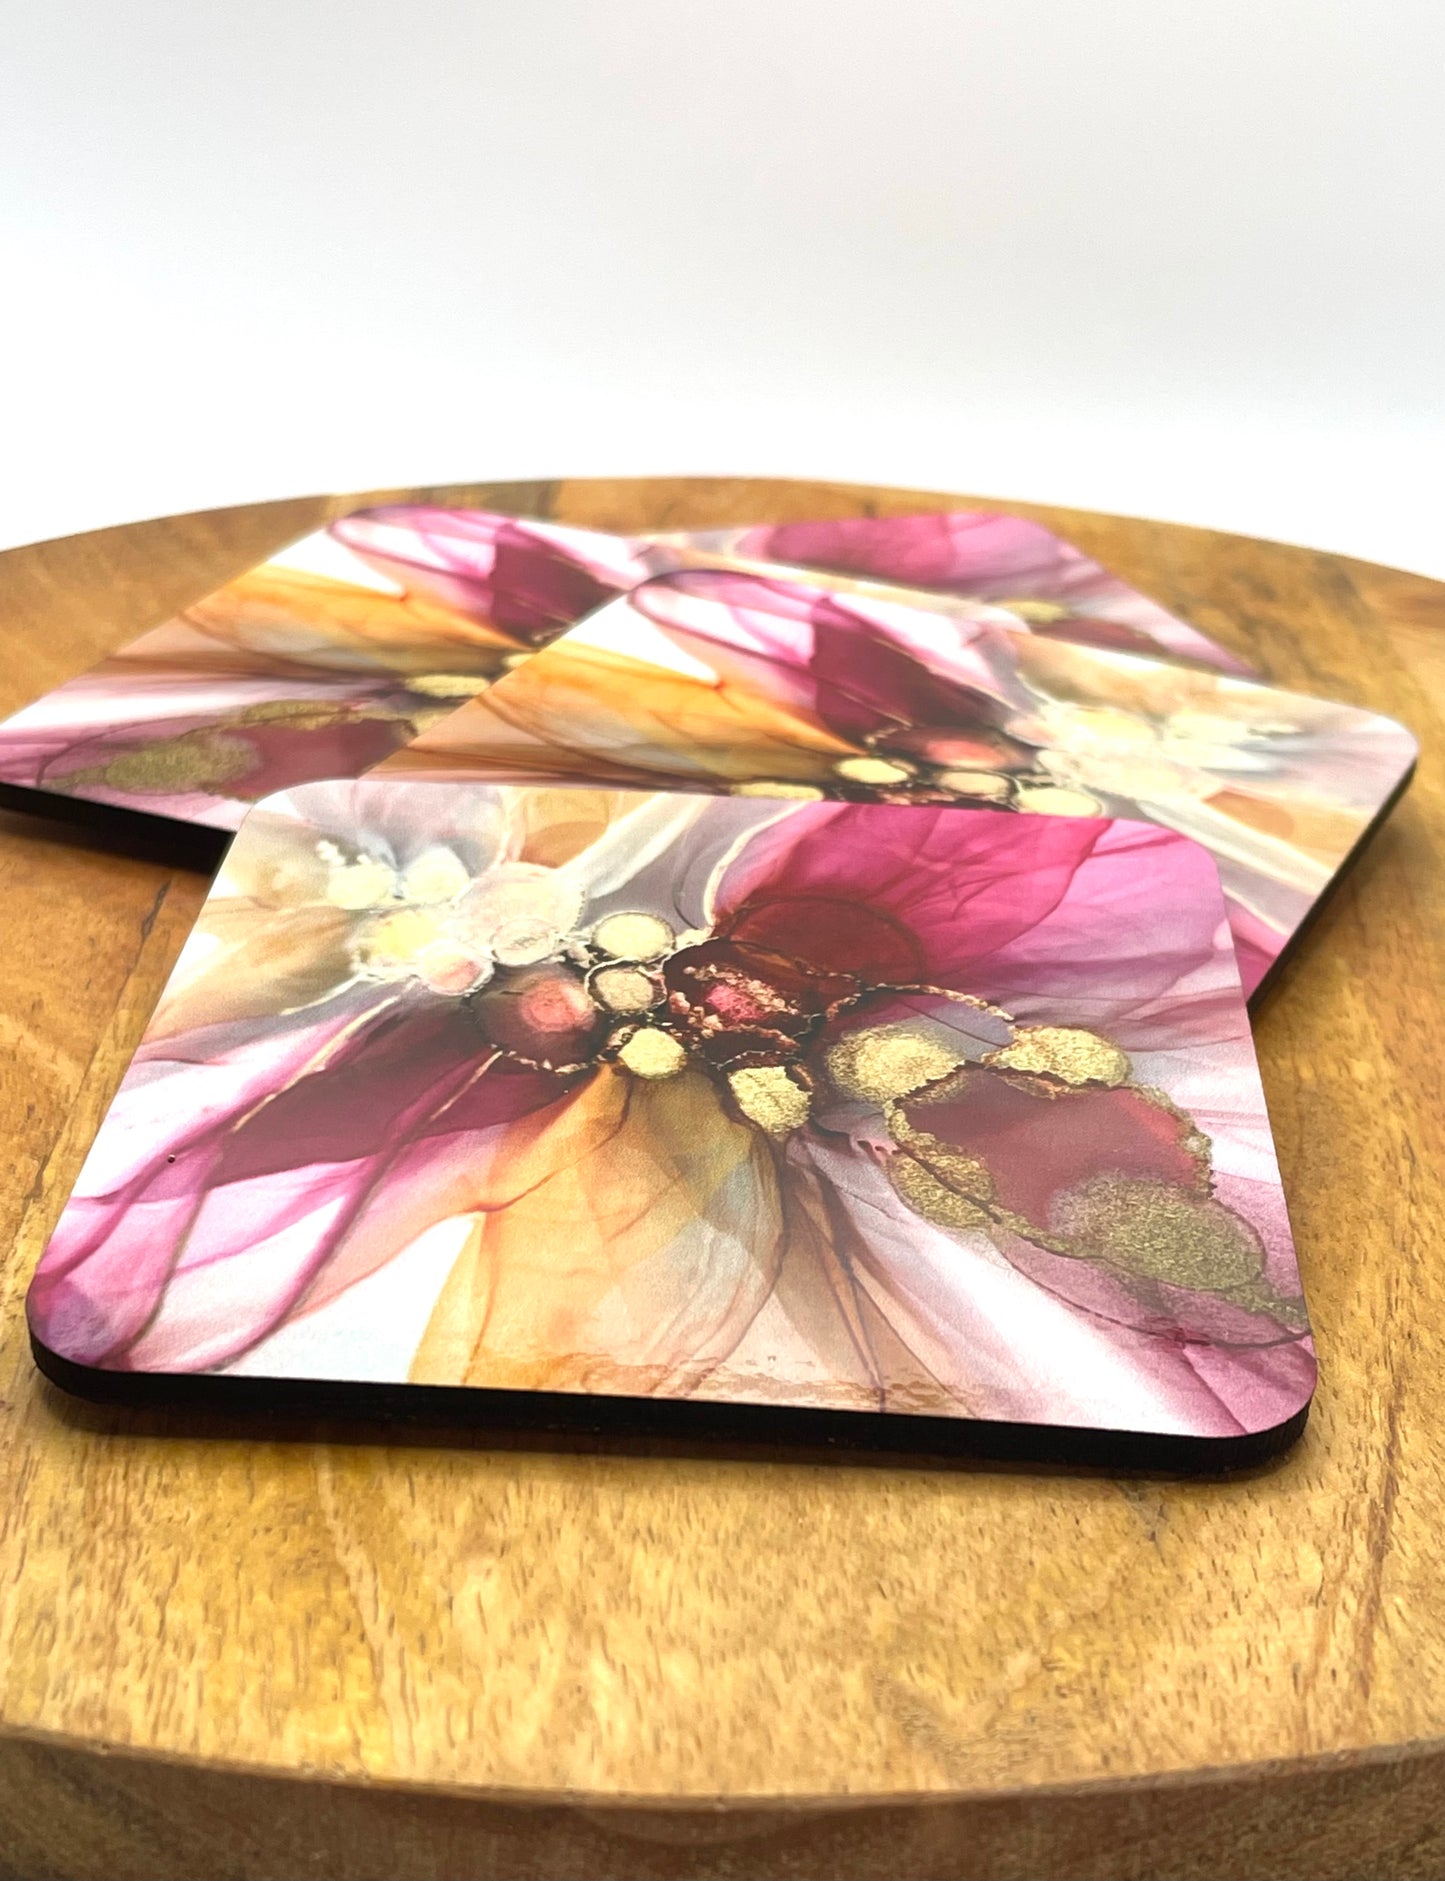 Drink Coasters Intertwined. Coaste with art print. Home decor and gifts.